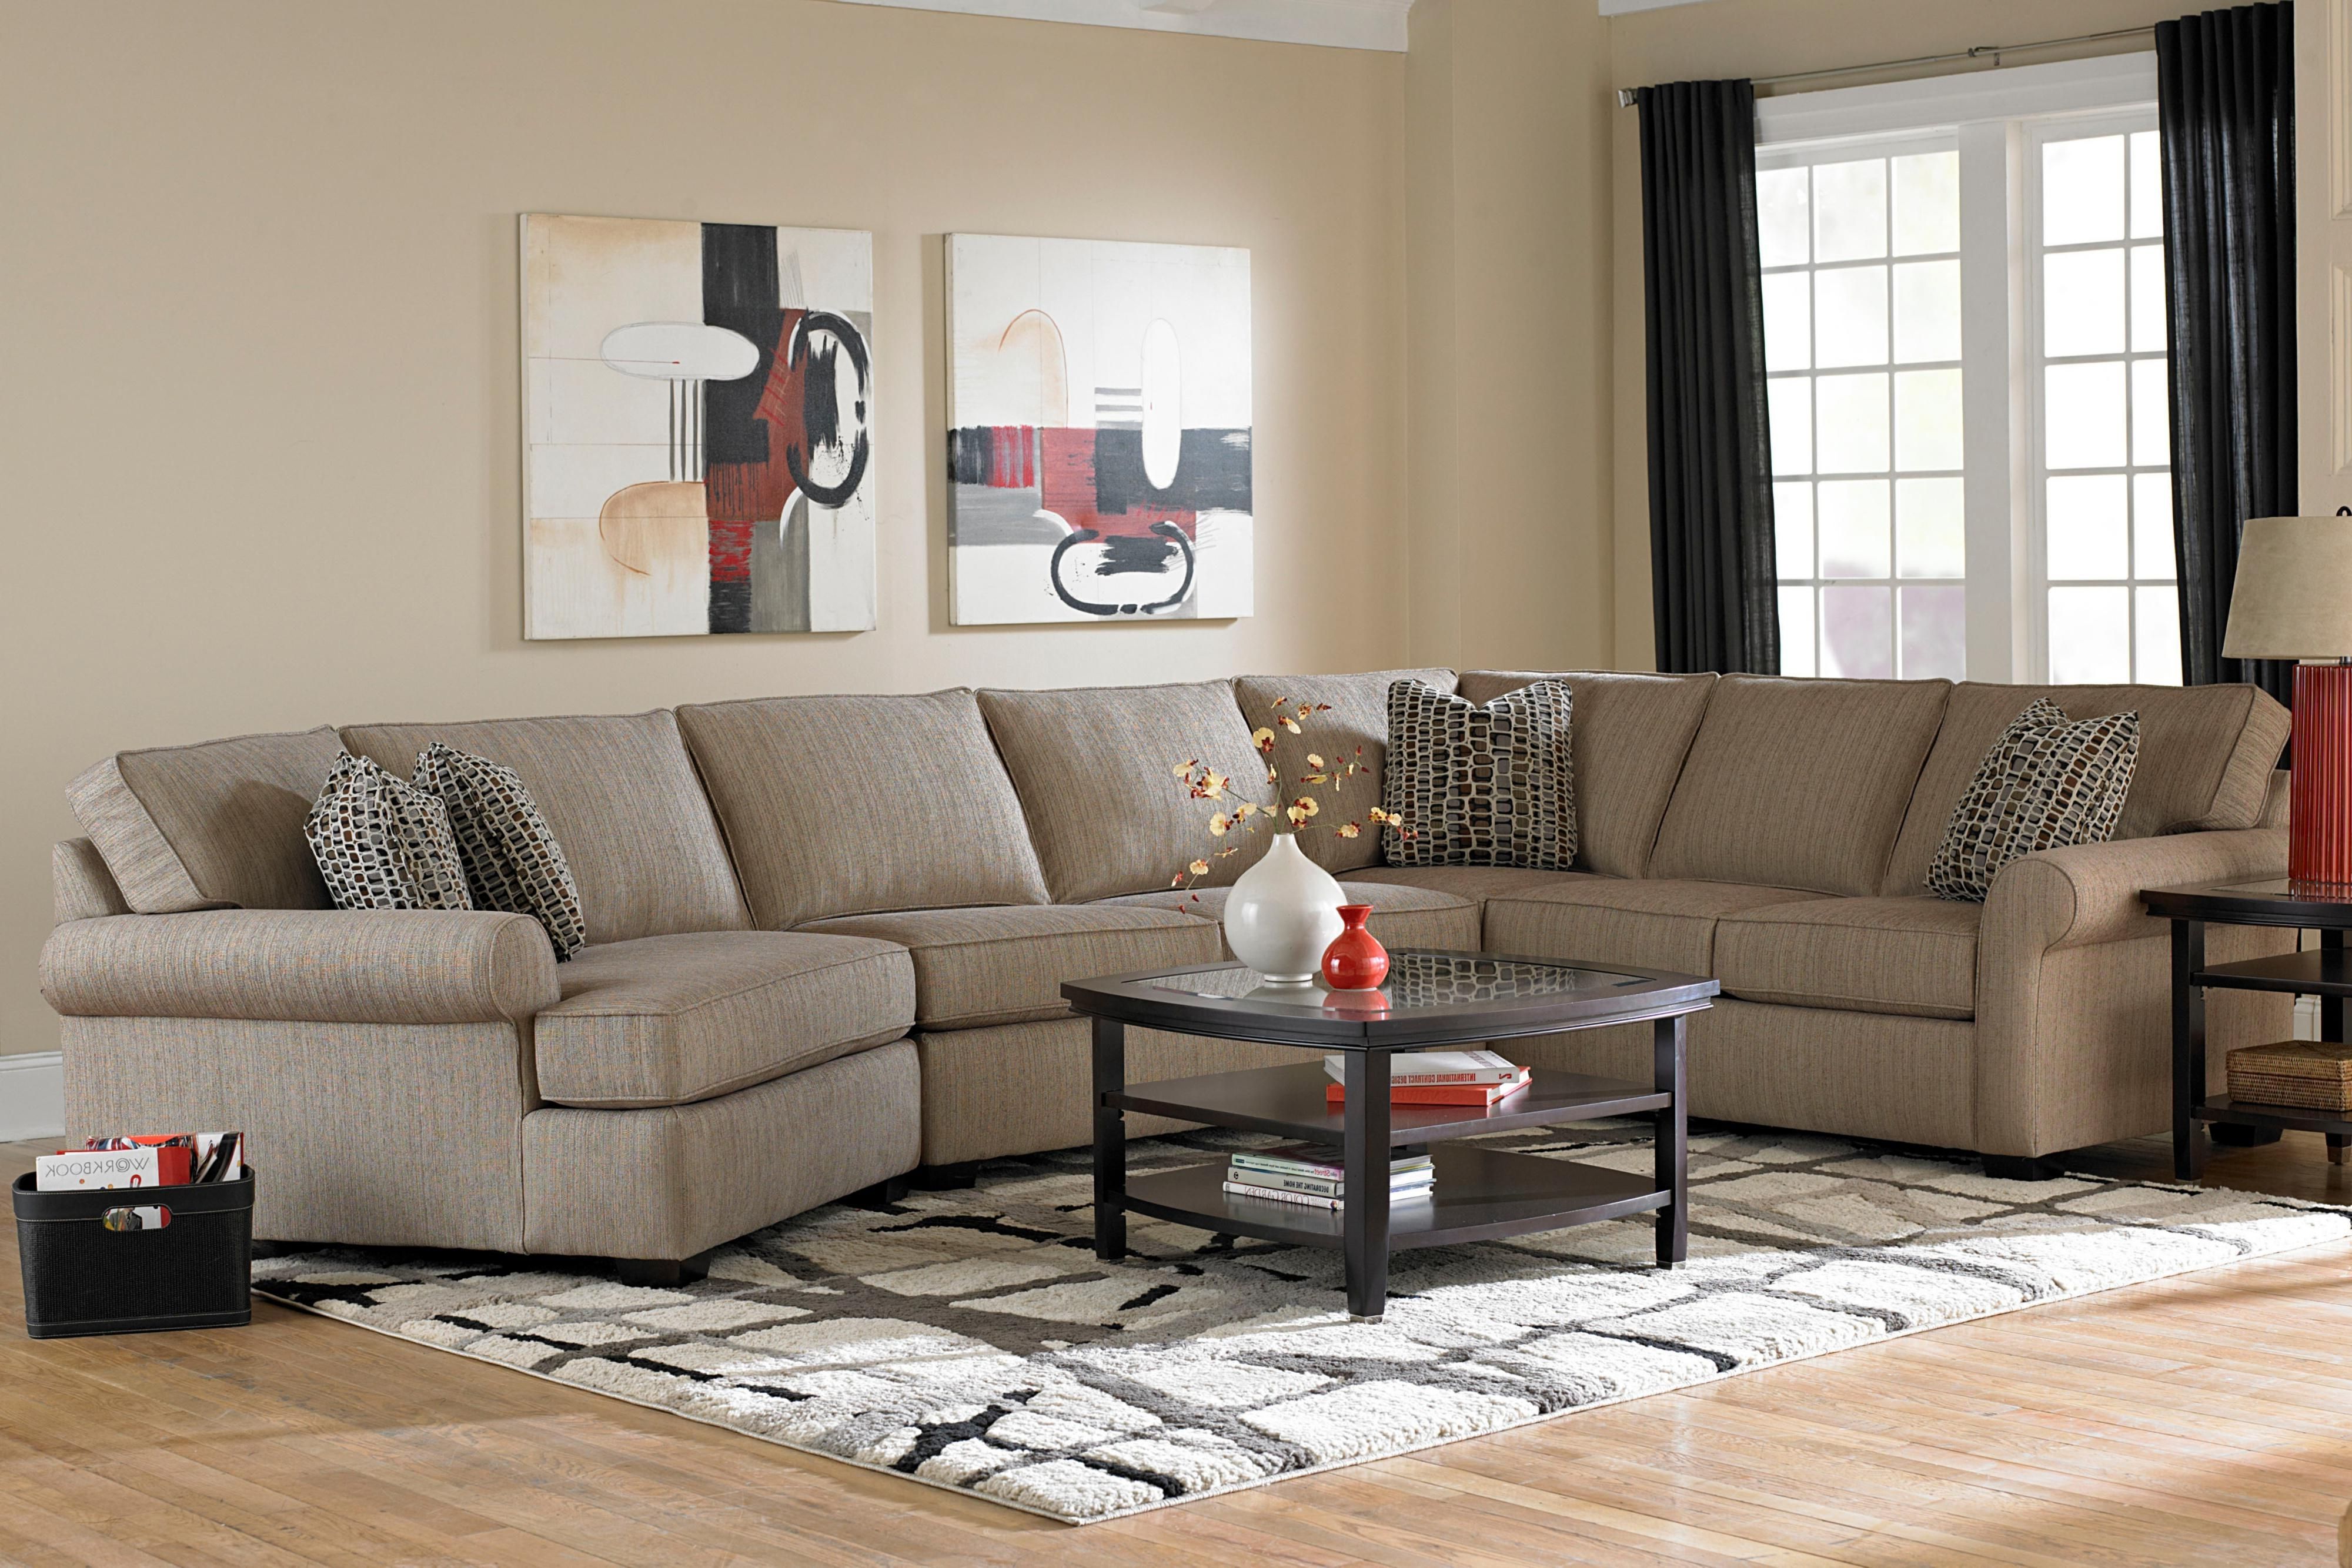 Broyhill Furniture Ethan Transitional Sectional Sofa With Right With Regard To Most Up To Date Sectional Sofas At Broyhill (View 10 of 20)